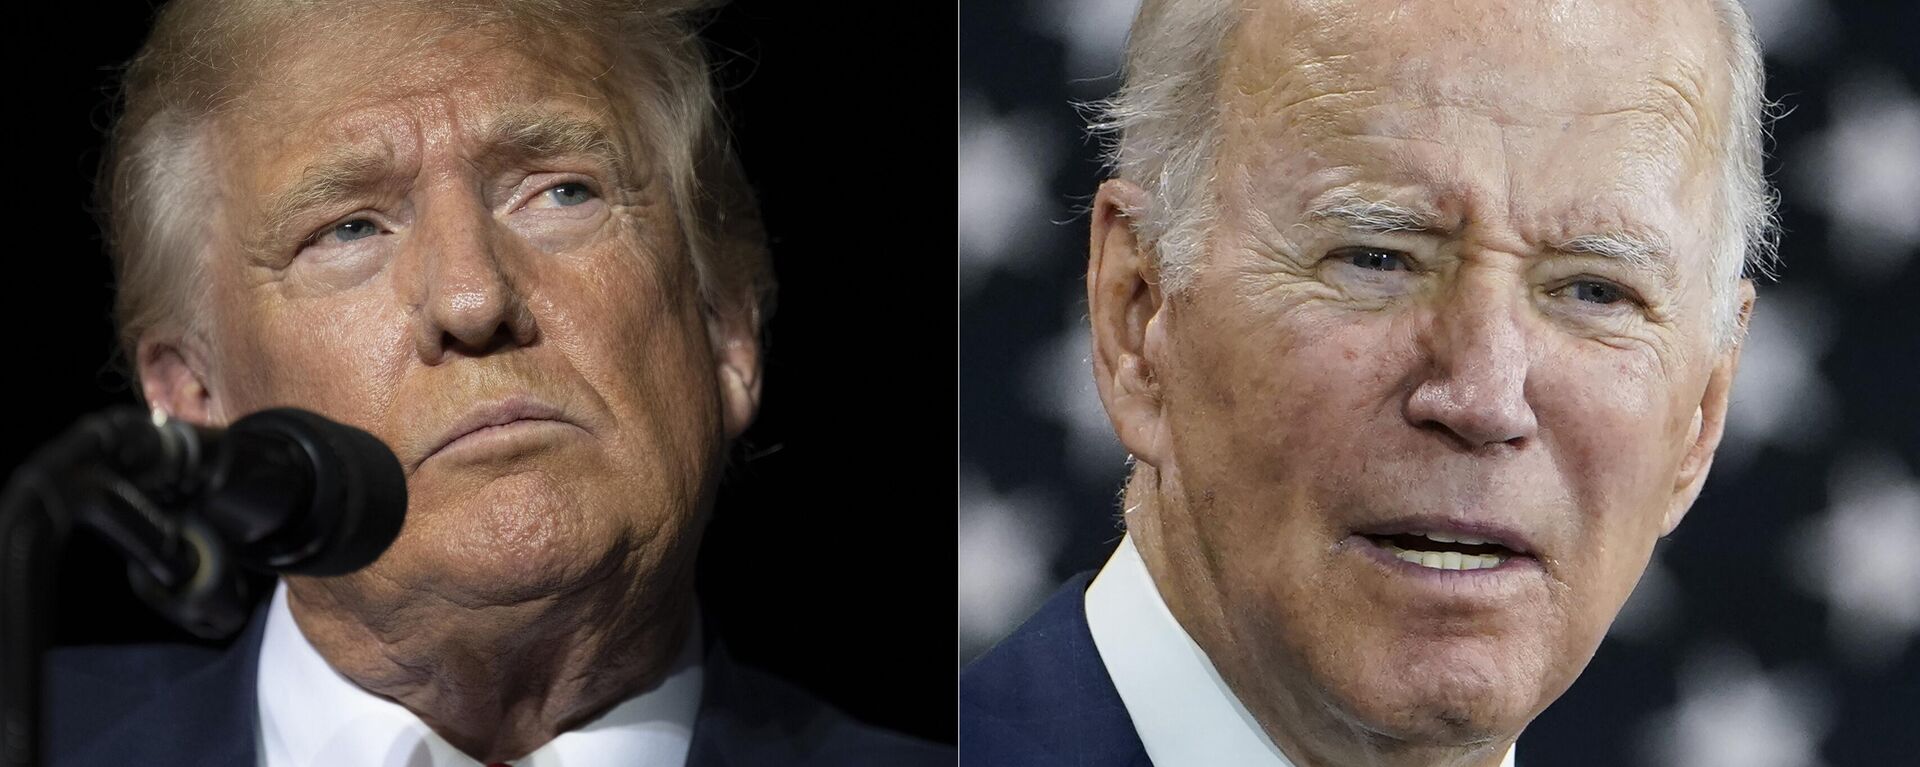 This combination of photos shows former President Donald Trump, left, and President Joe Biden, right. Biden and Trump are preparing for a possible rematch in 2024. But a new poll finds a notable lack of enthusiasm within the parties for either man as his party's leader, and a clear opening for new leadership. The poll from The Associated Press-NORC Center for Public Affairs Research finds a third of both Democrats and Republicans are unsure of who they want leading their party.  - Sputnik International, 1920, 24.04.2023